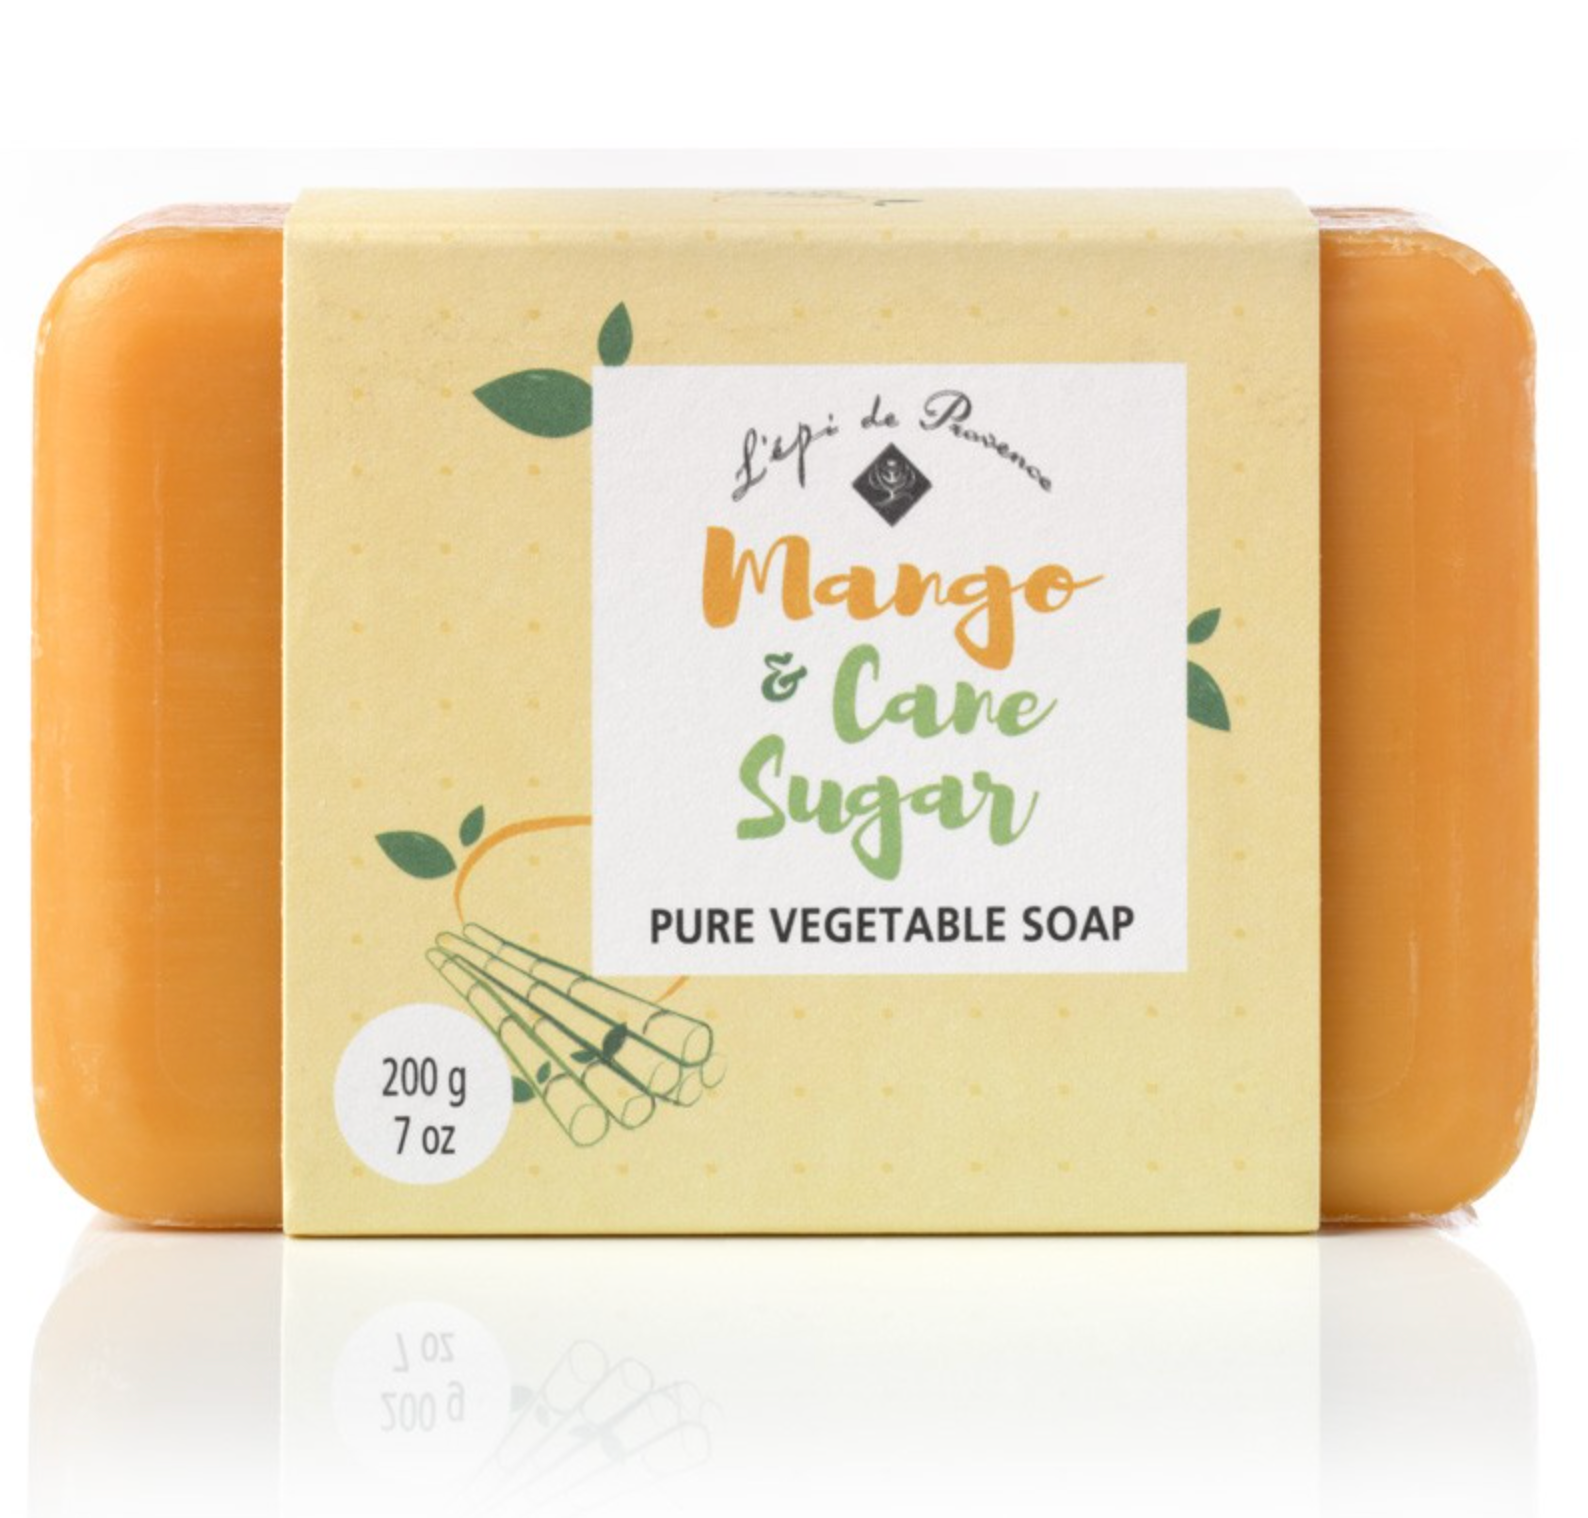 Mango and Cane Sugar Soap - Heart of the Home LV